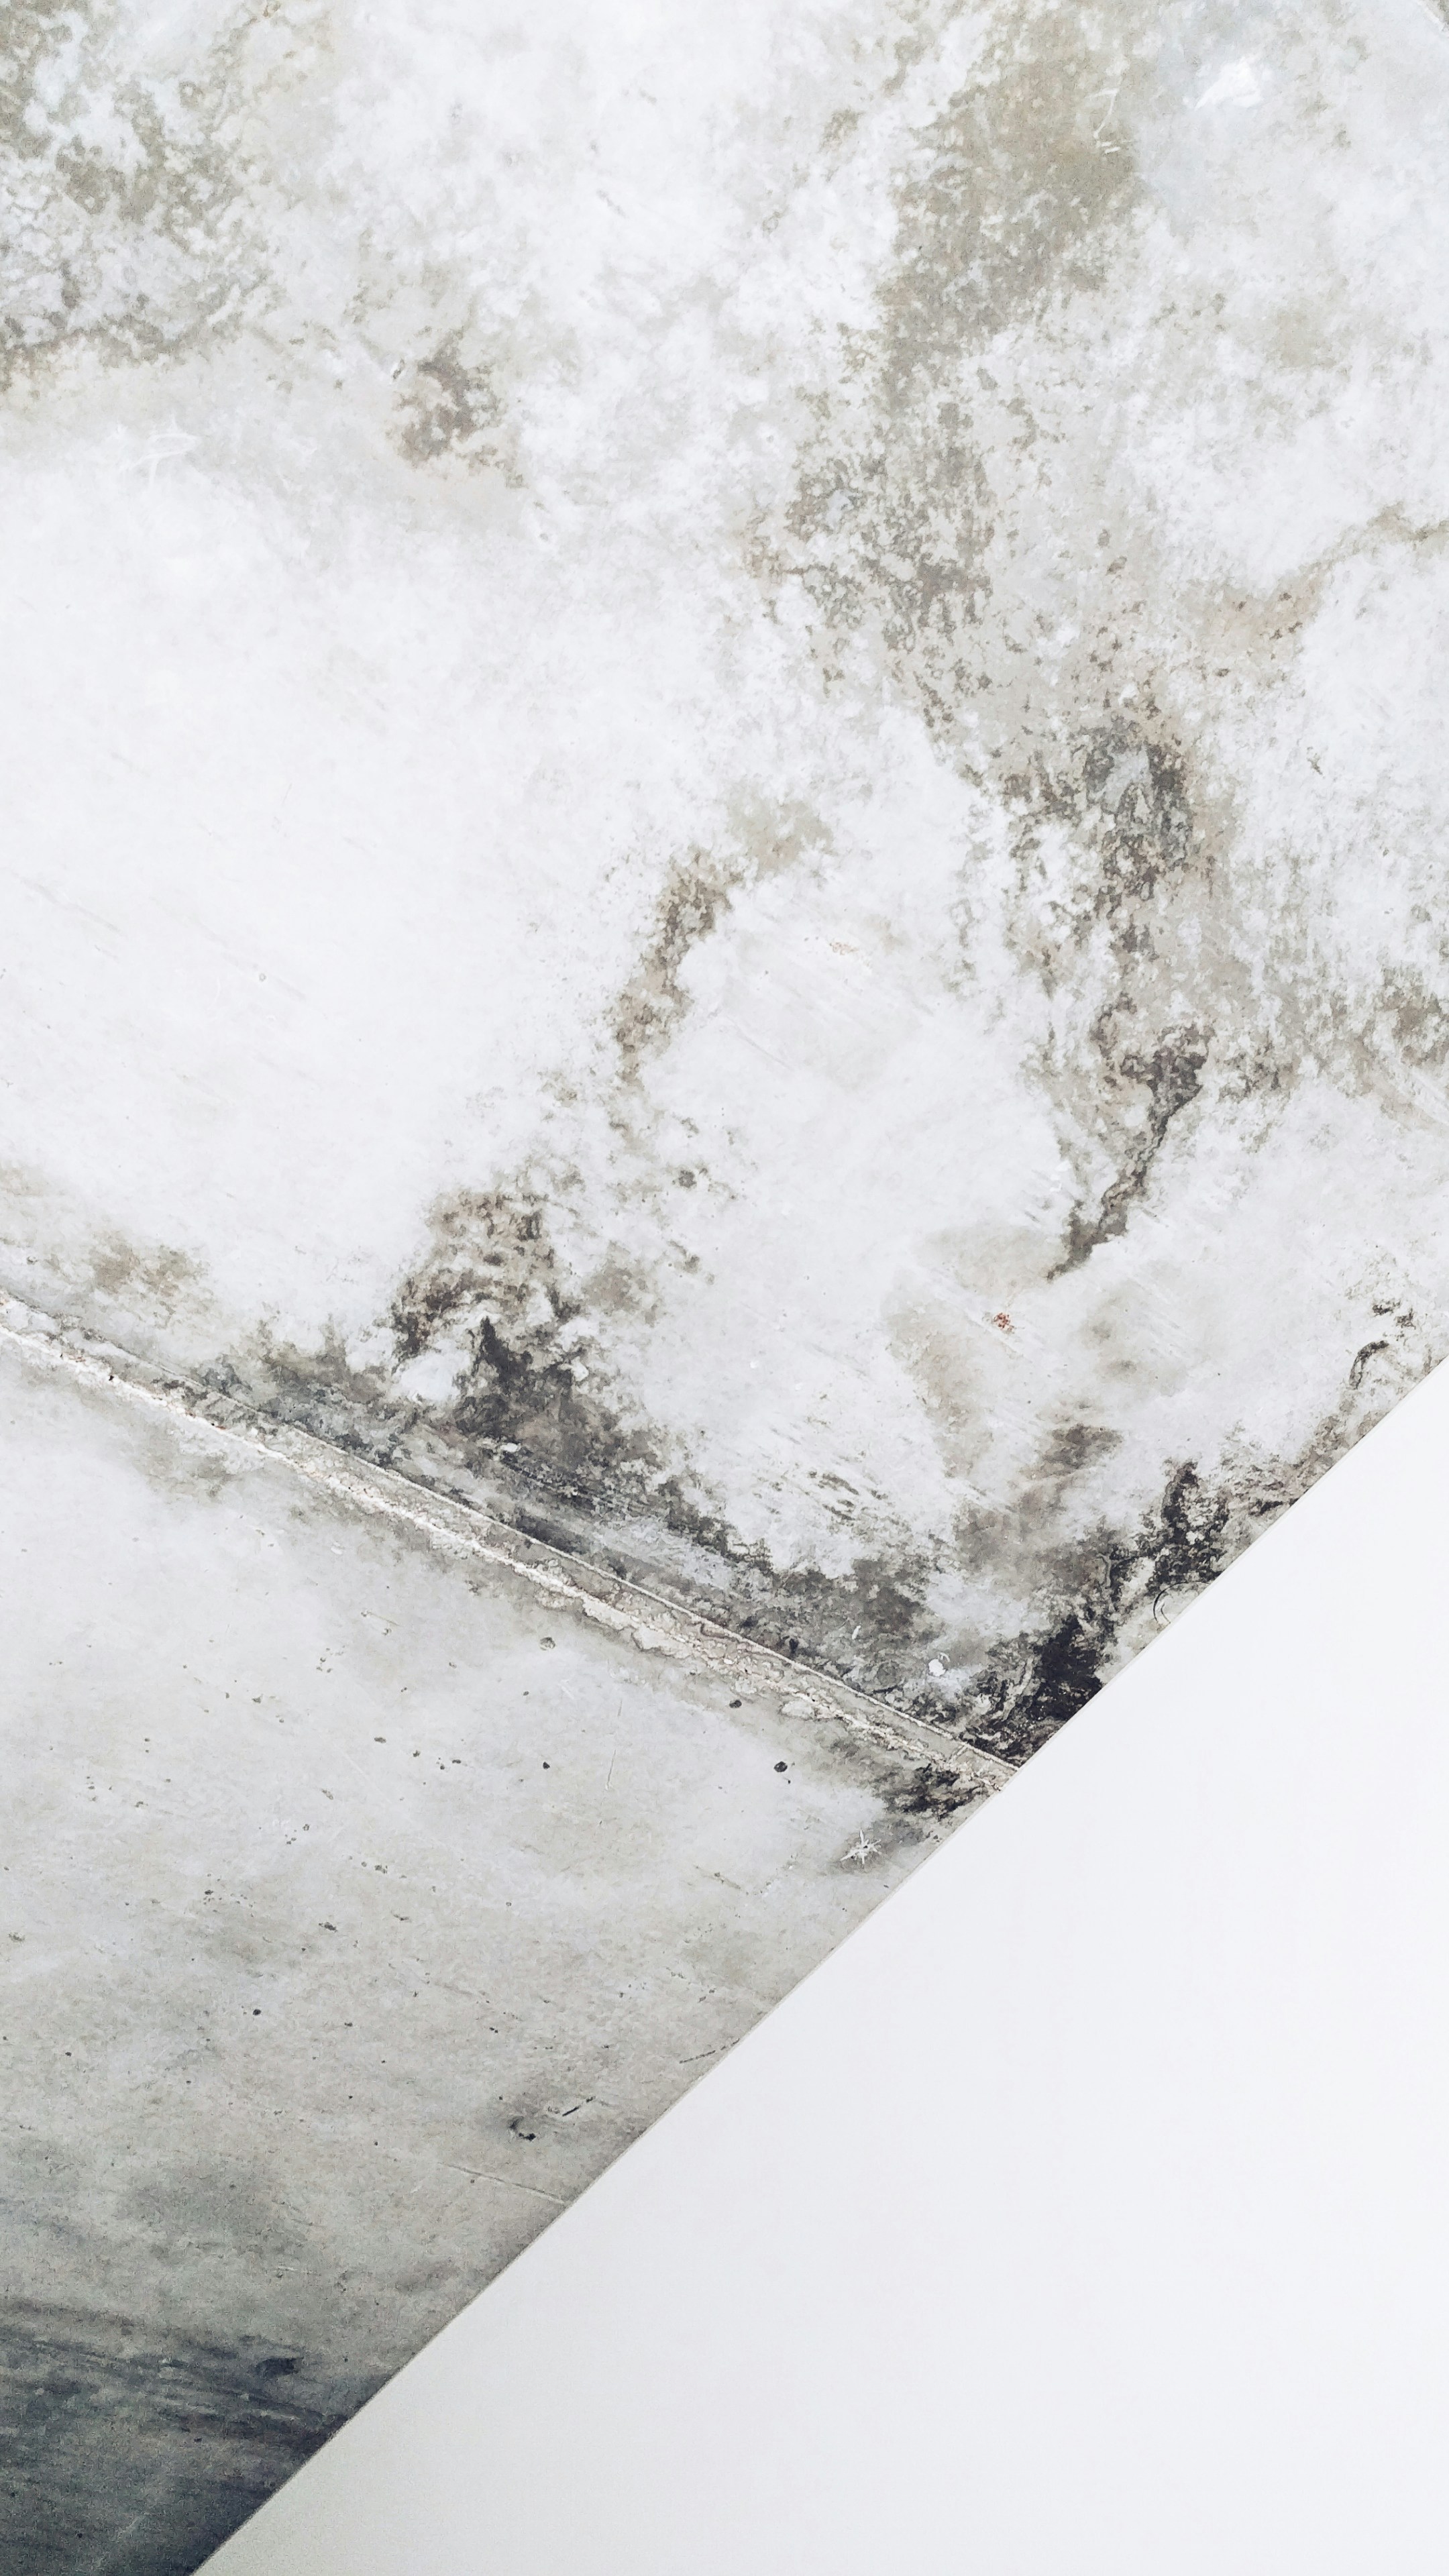 7 Effective Ways to Reduce Mould in Your House During the Rainy Season